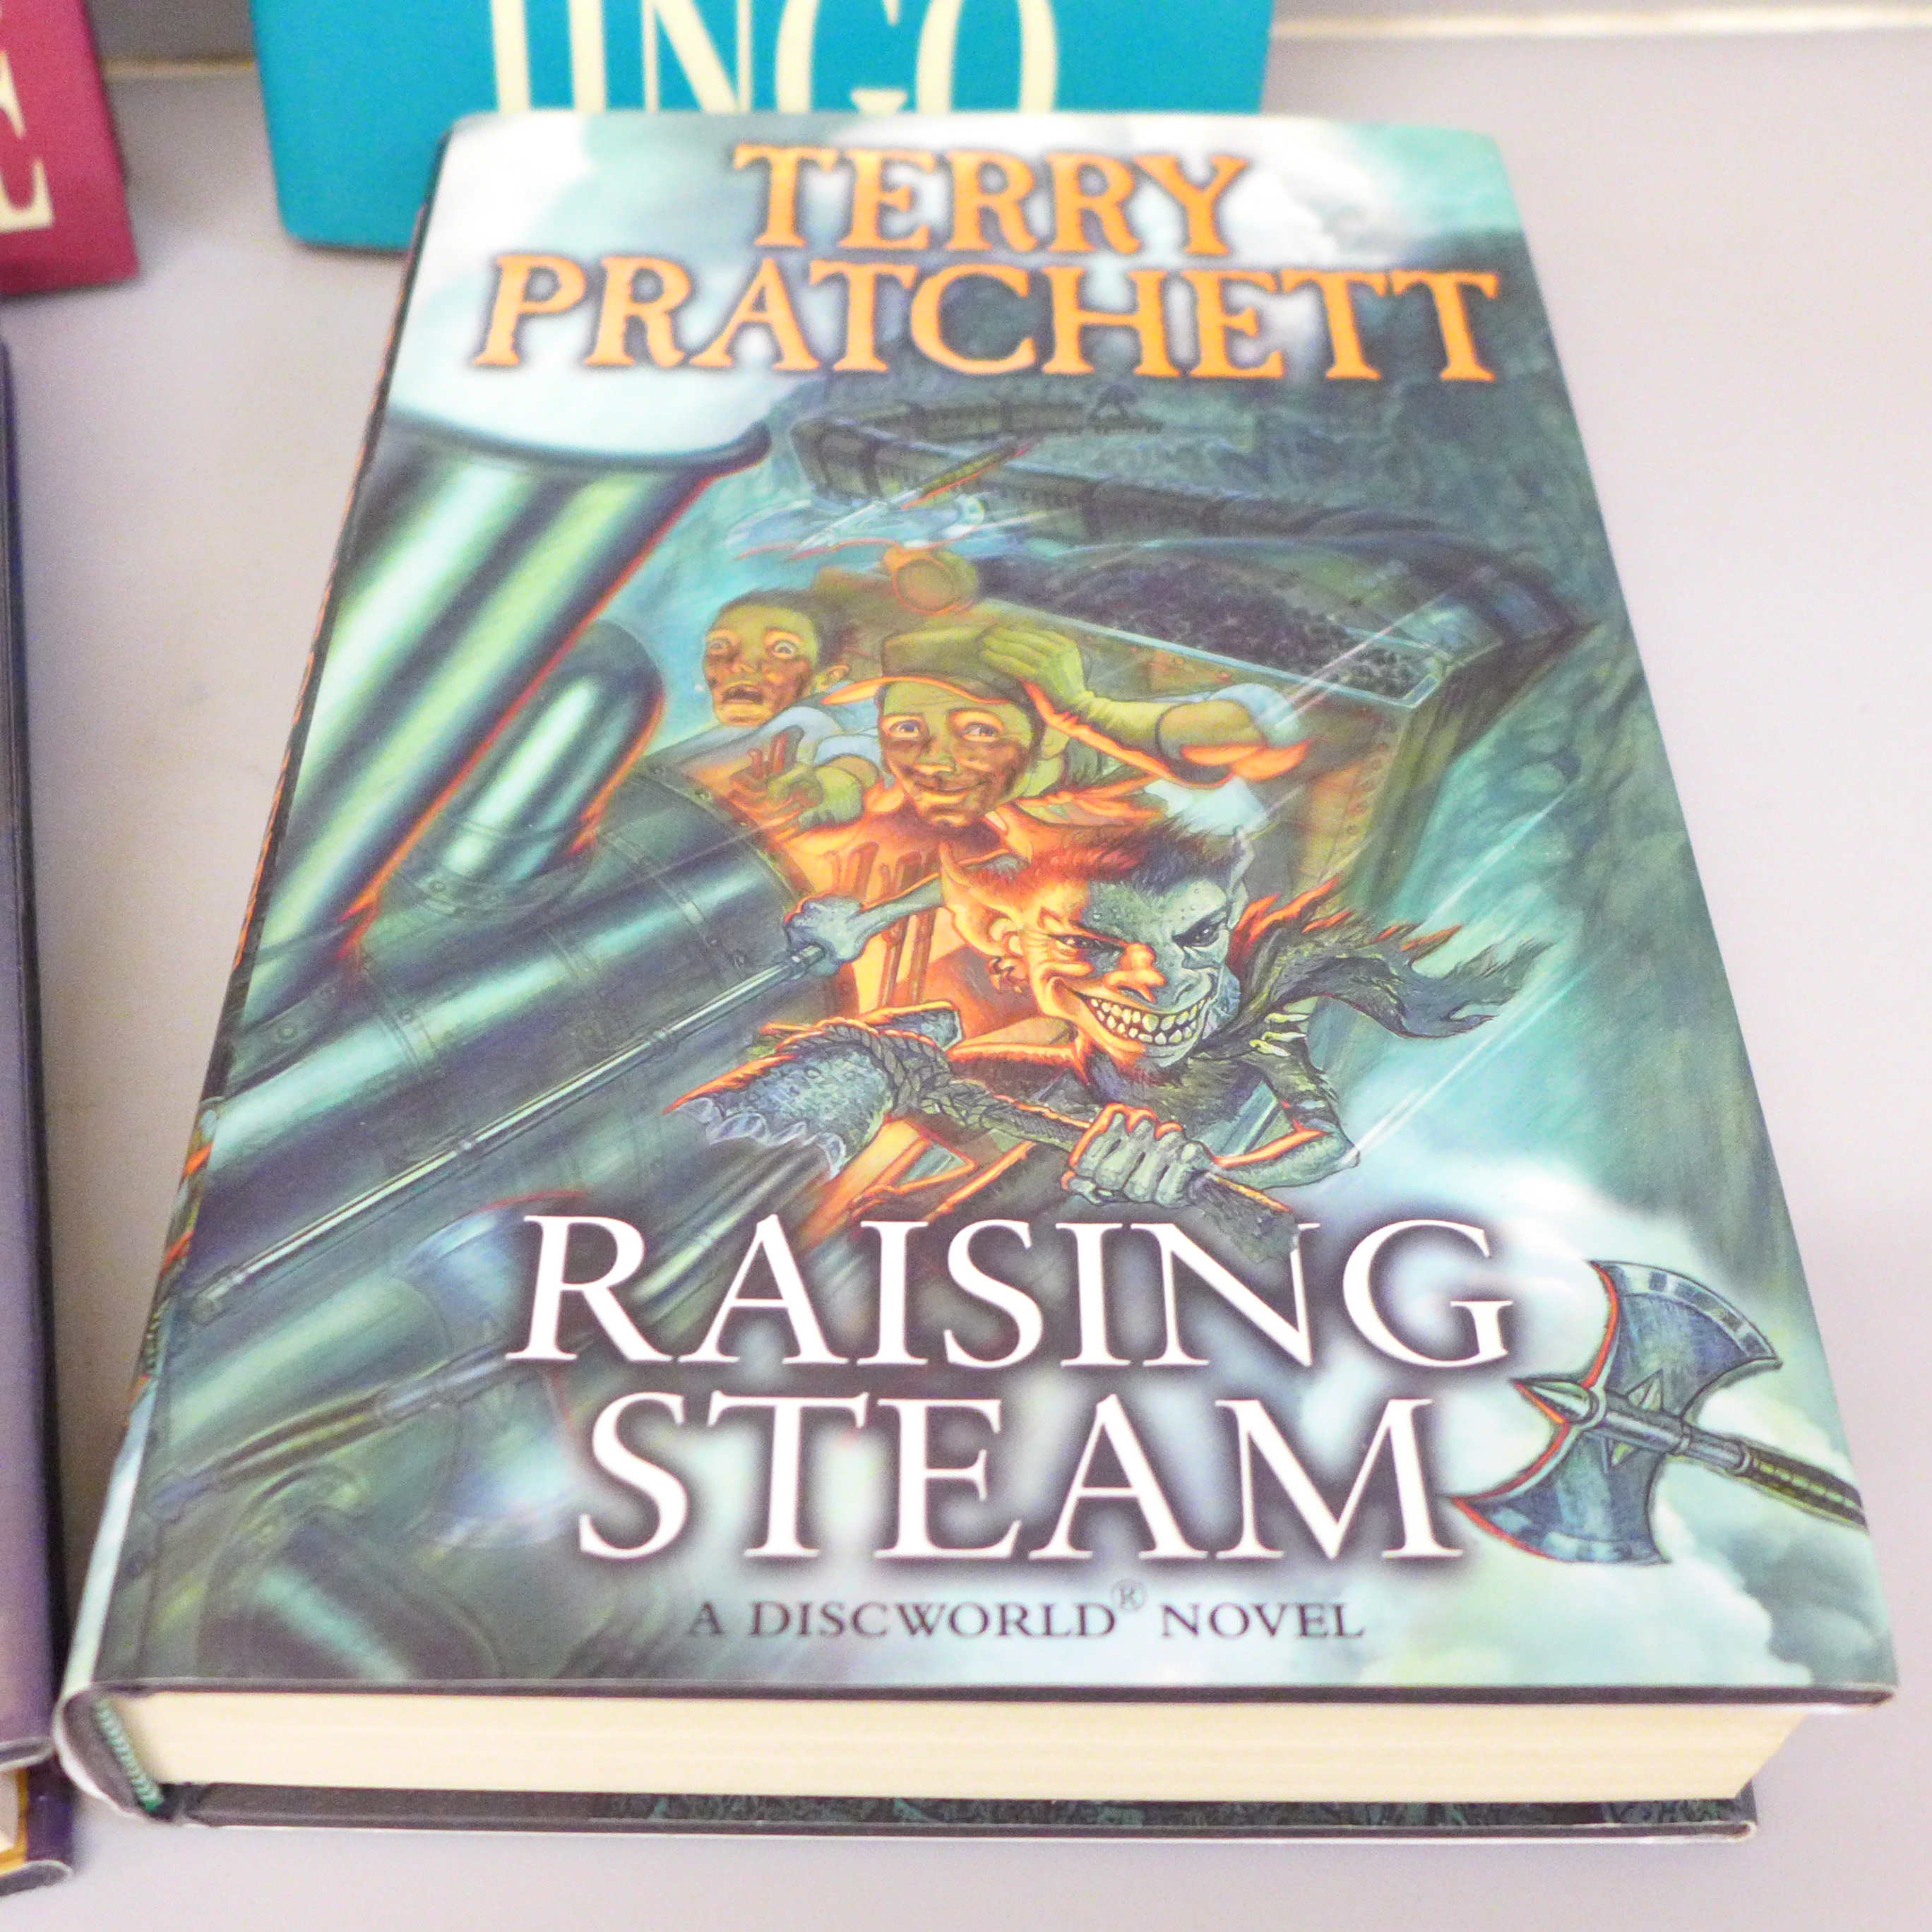 Four hardback first edition Discworld novels by Terry Pratchett with a signed paperback - - Image 3 of 3